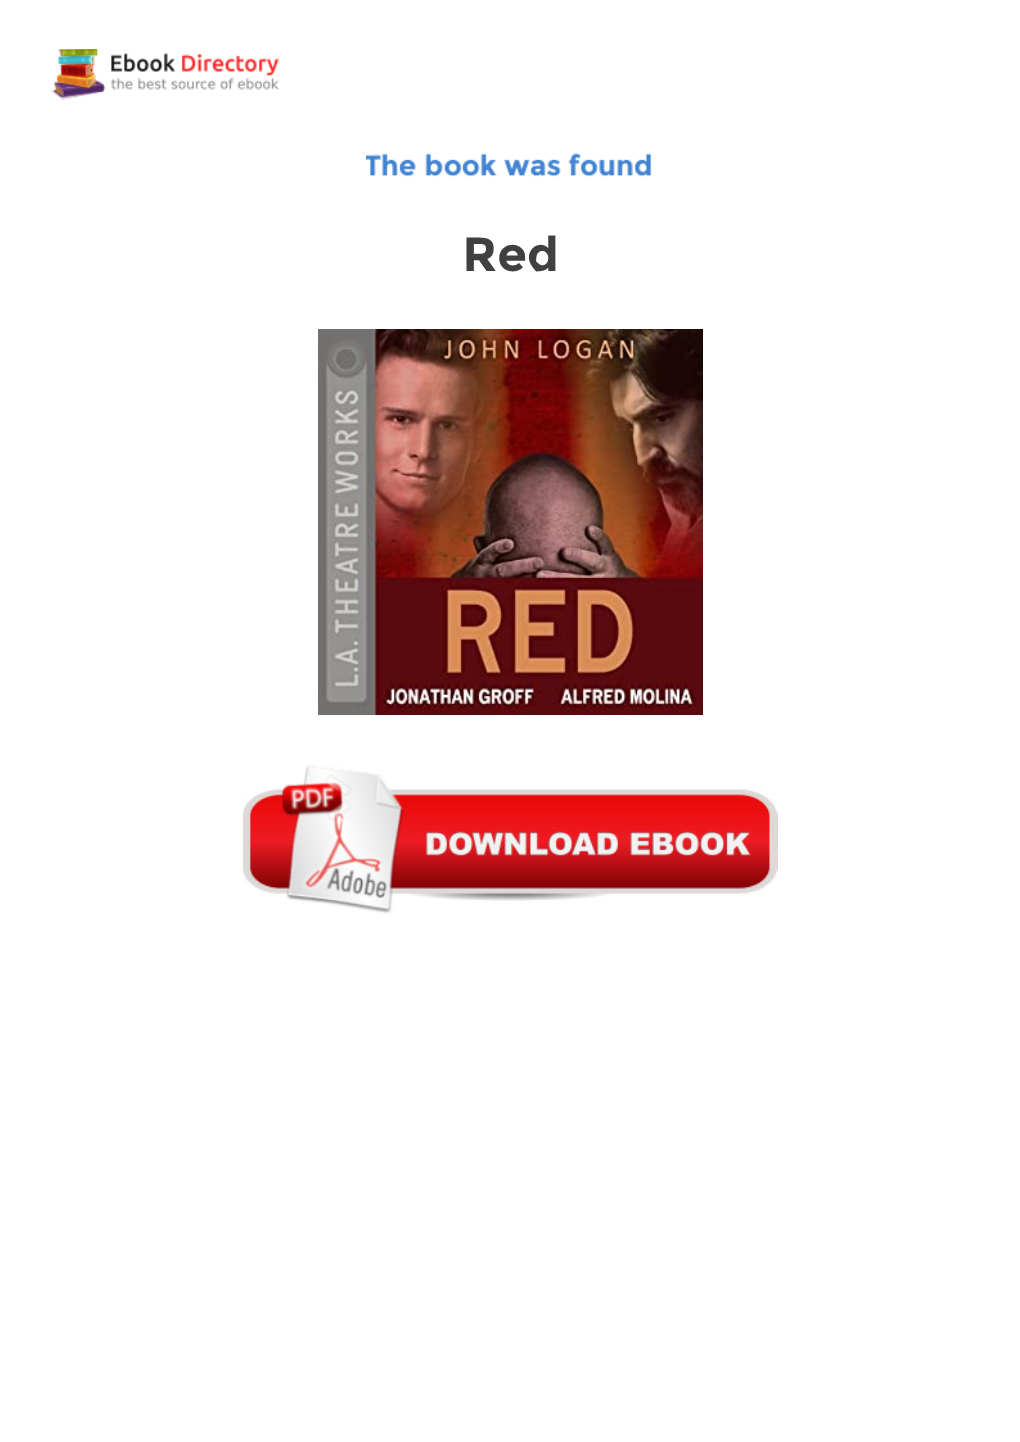 Ebook Red Freeware the Artist Mark Rothko Has Just Hired Ken, an Aspiring Artist, to Be His Assistant and Errand Boy